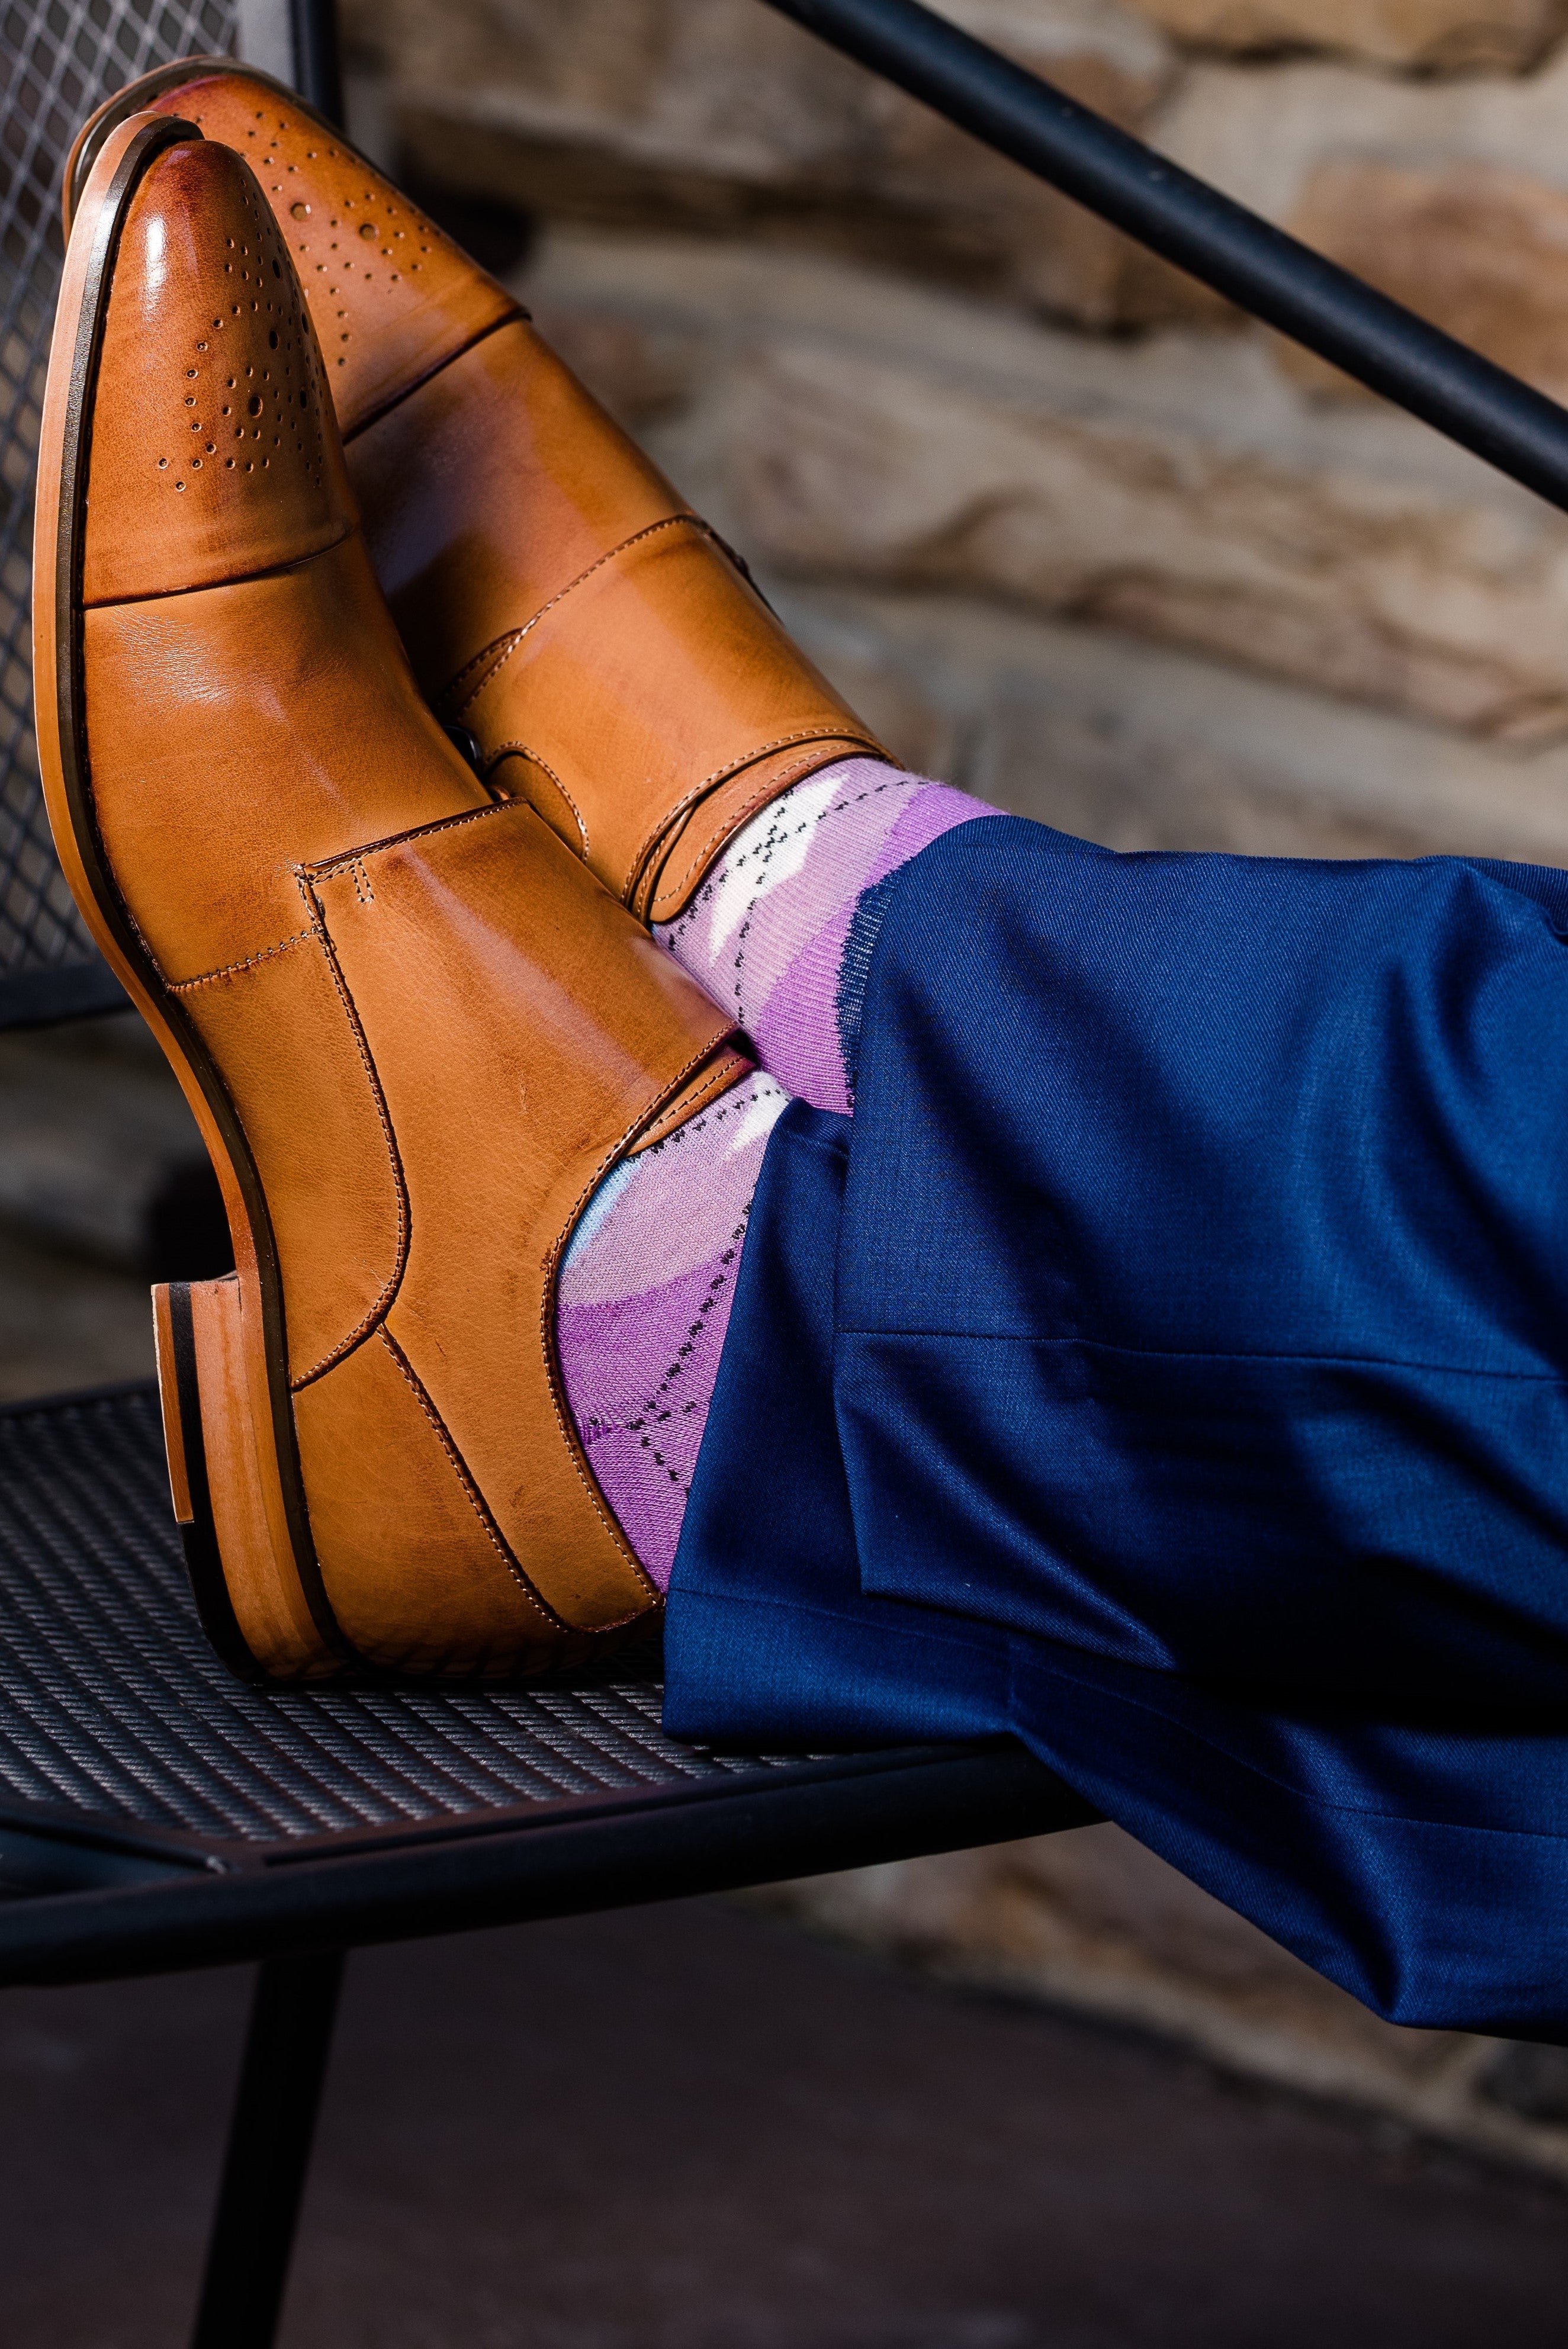 Bring Dress Shoes Back To Life In 5 Minutes